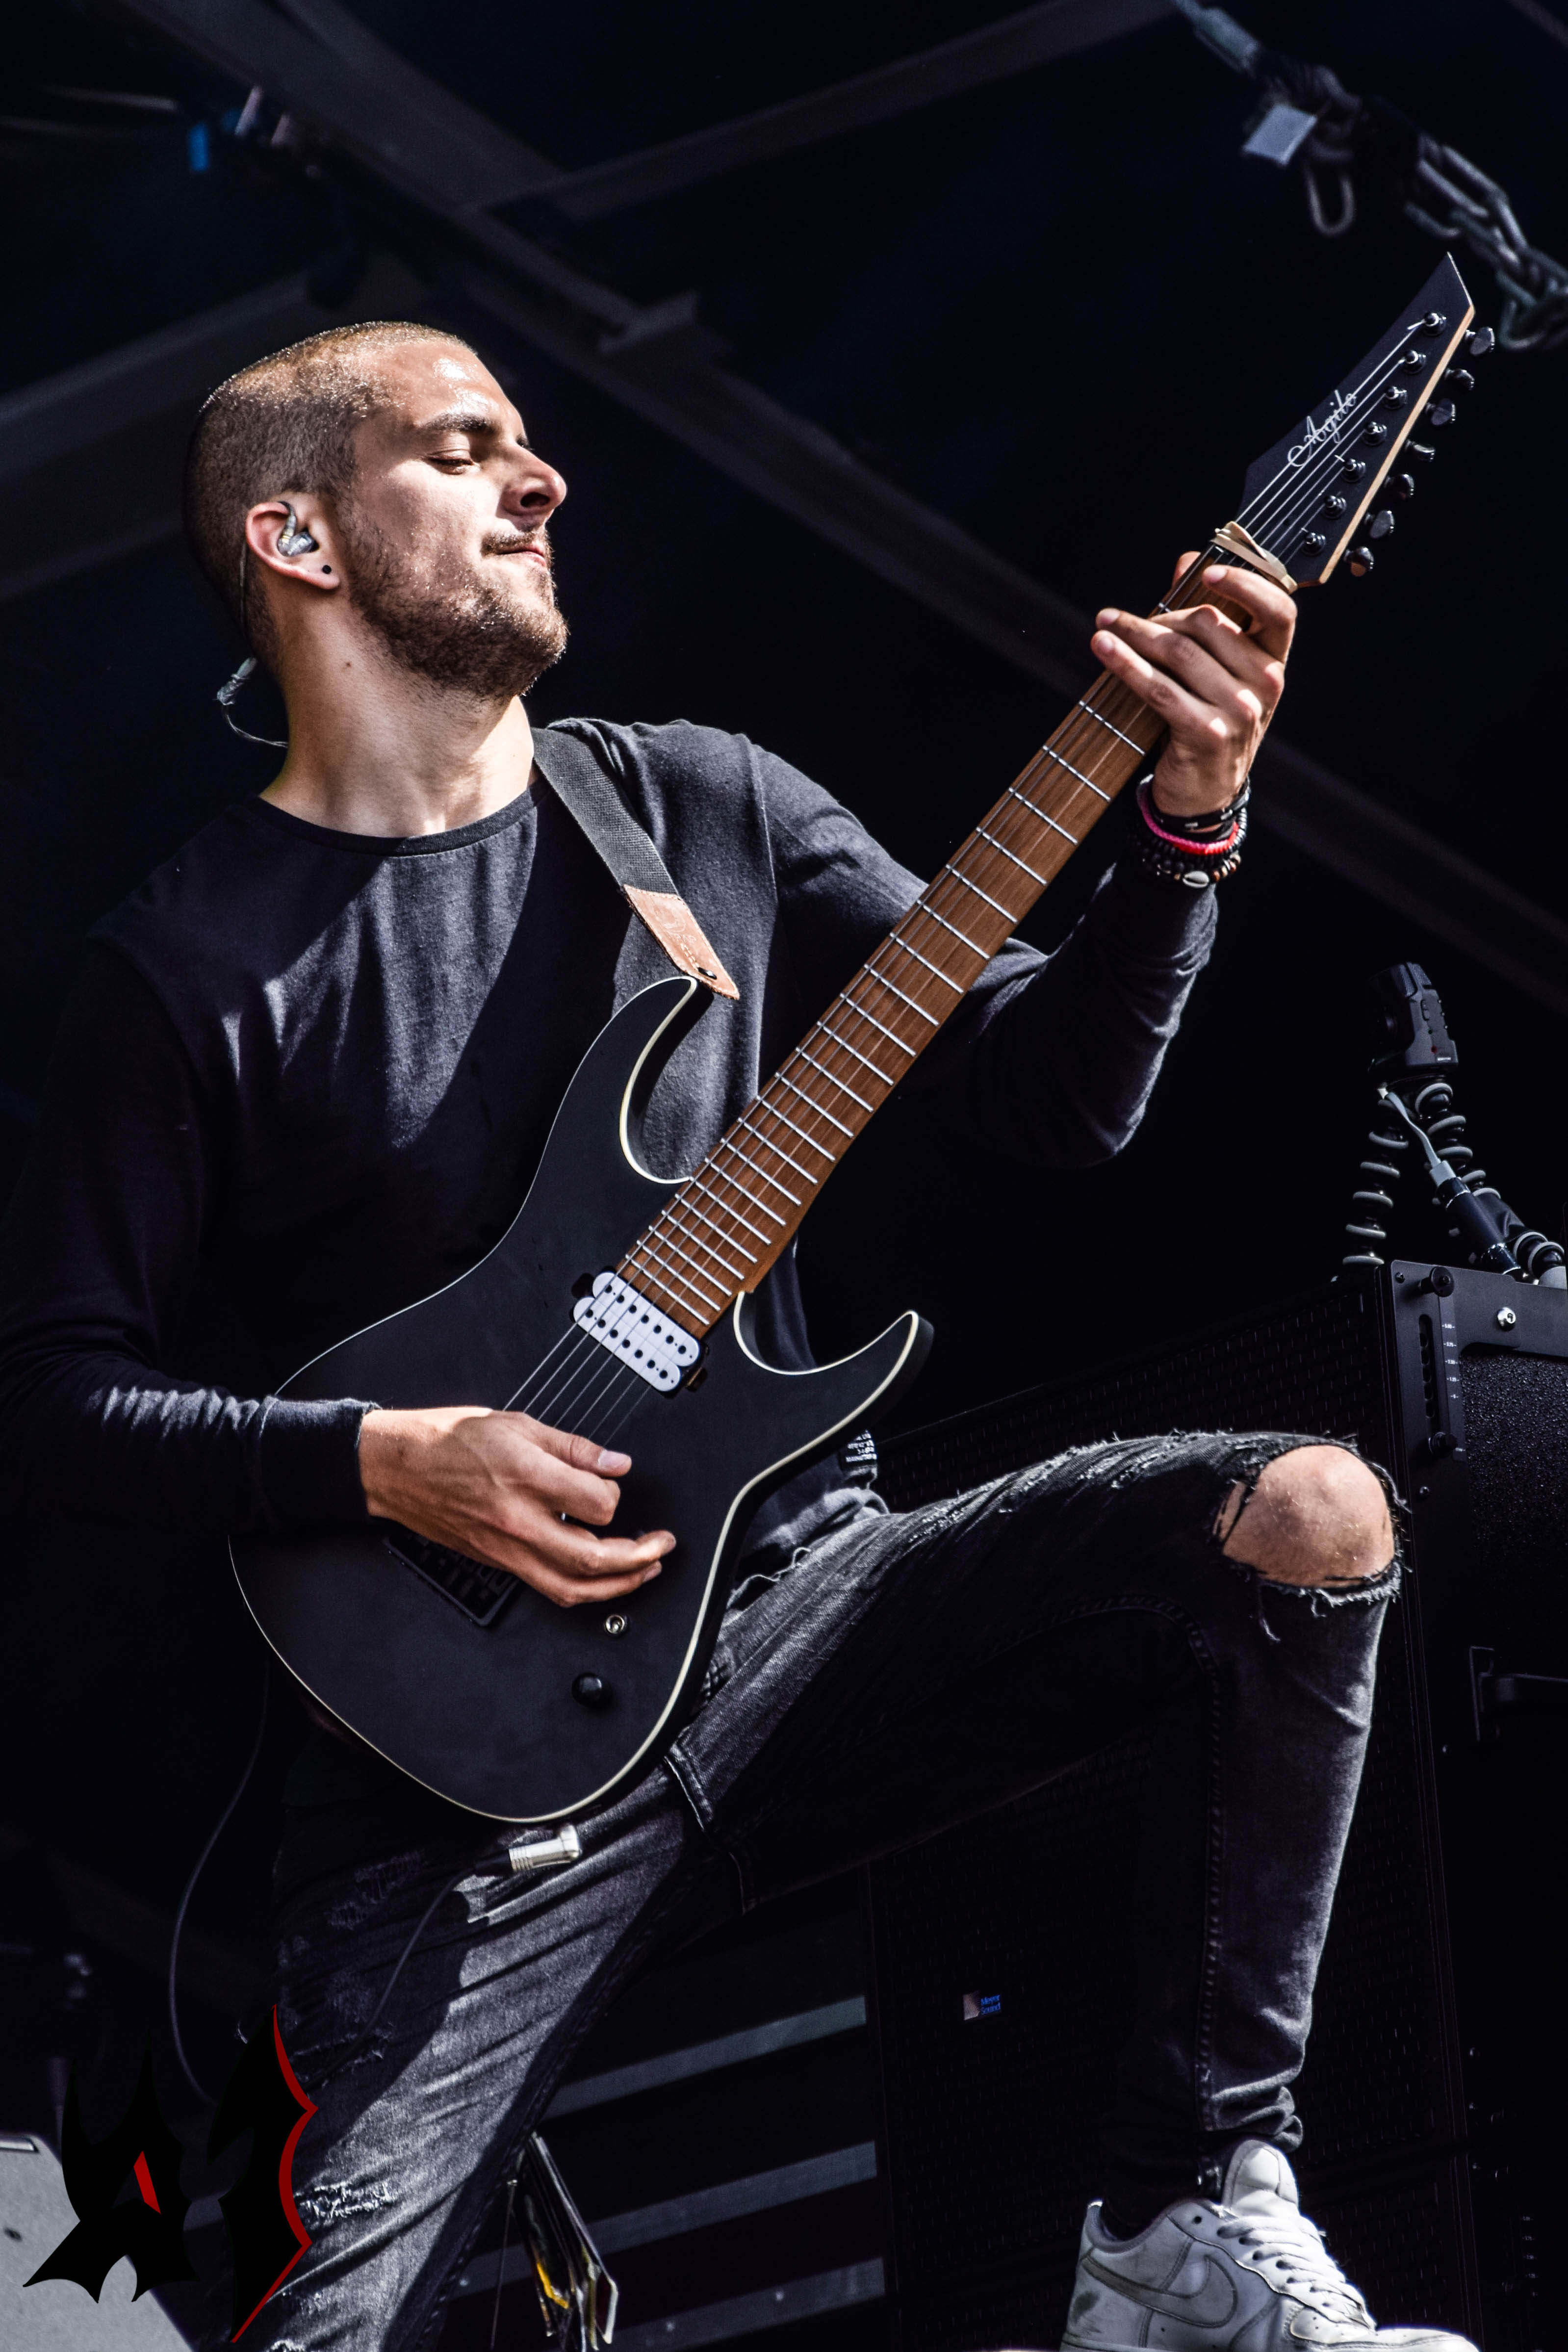 Donwload 2018 – Day 2 - Betraying The Martyrs 11